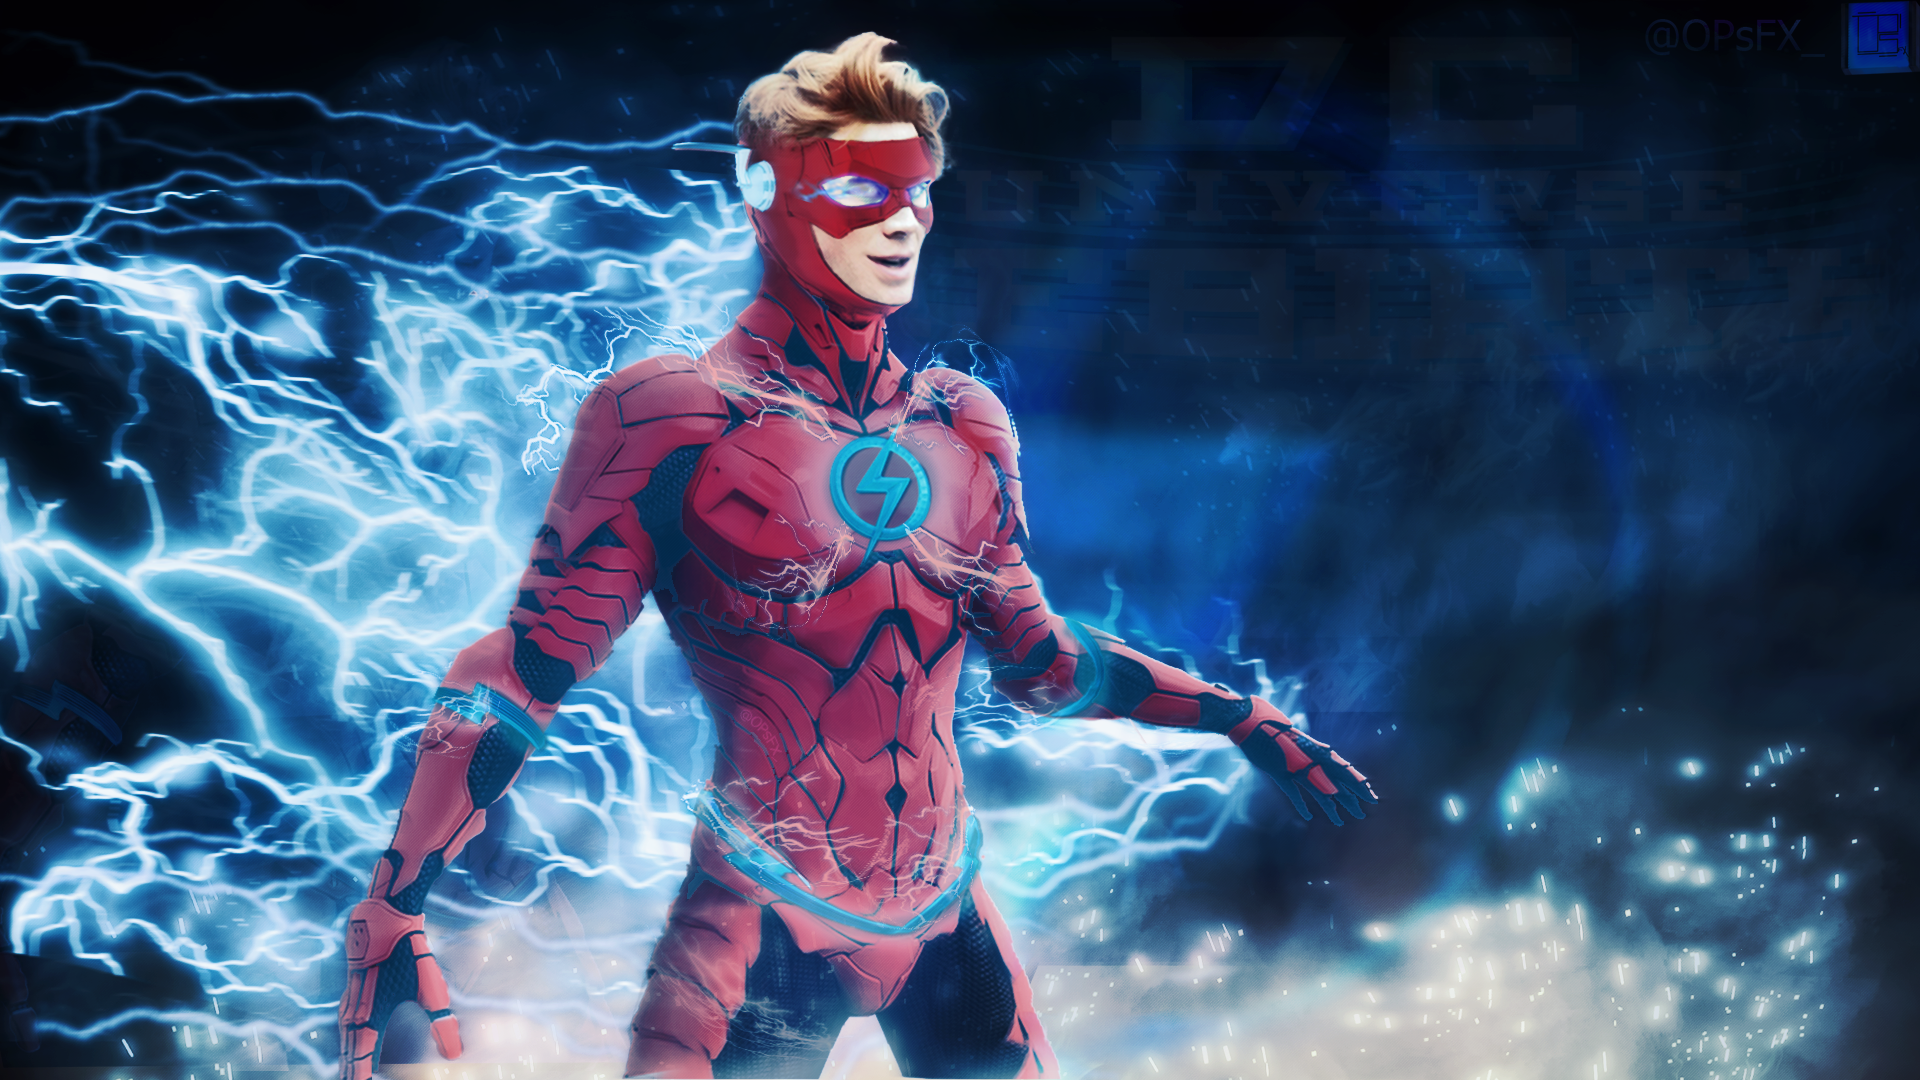 Wally west wallpapers